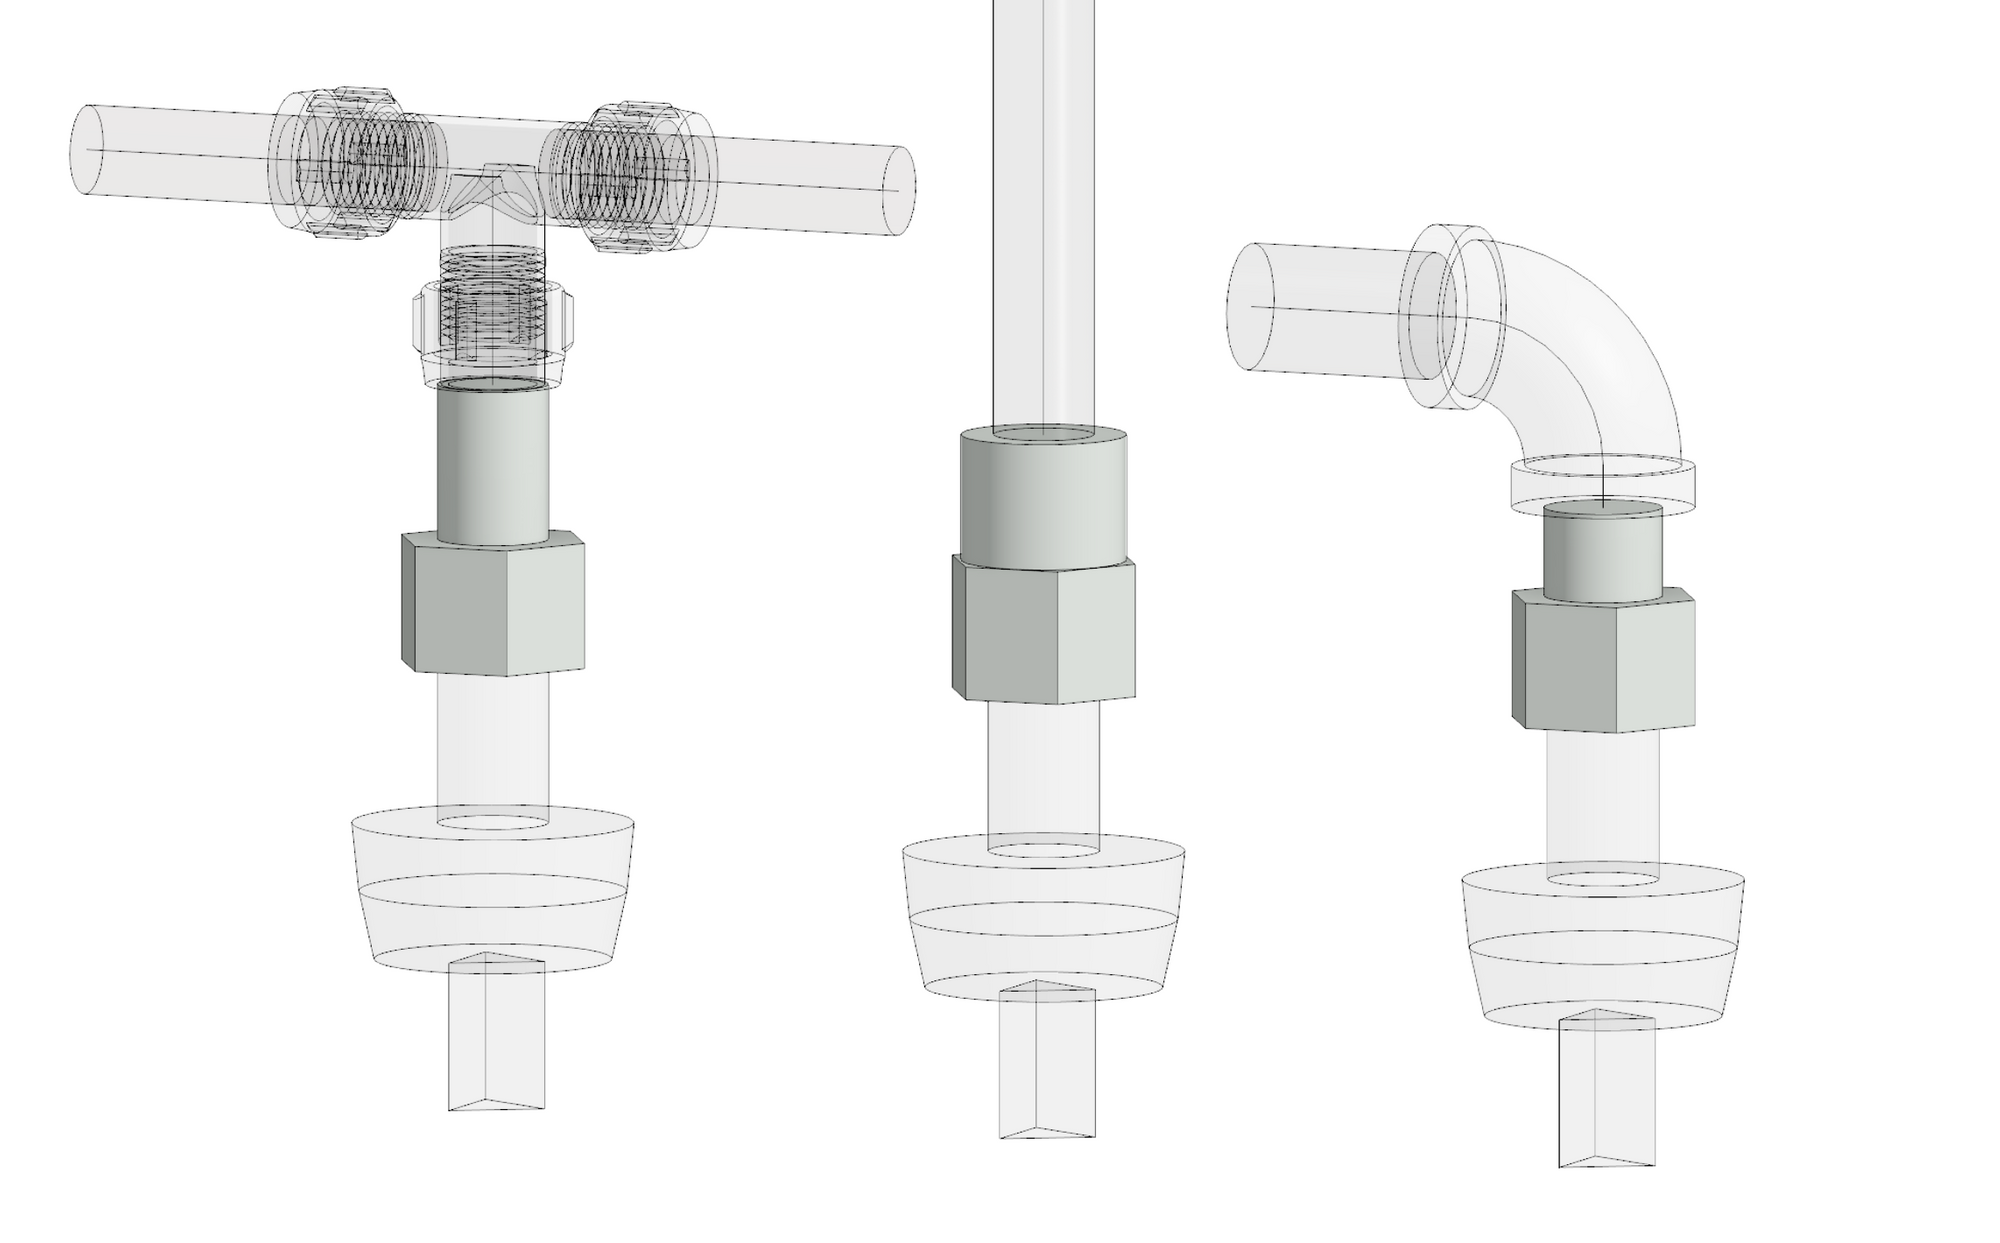 Revit families for compressed spigot, female threaded and male threaded adaptors.